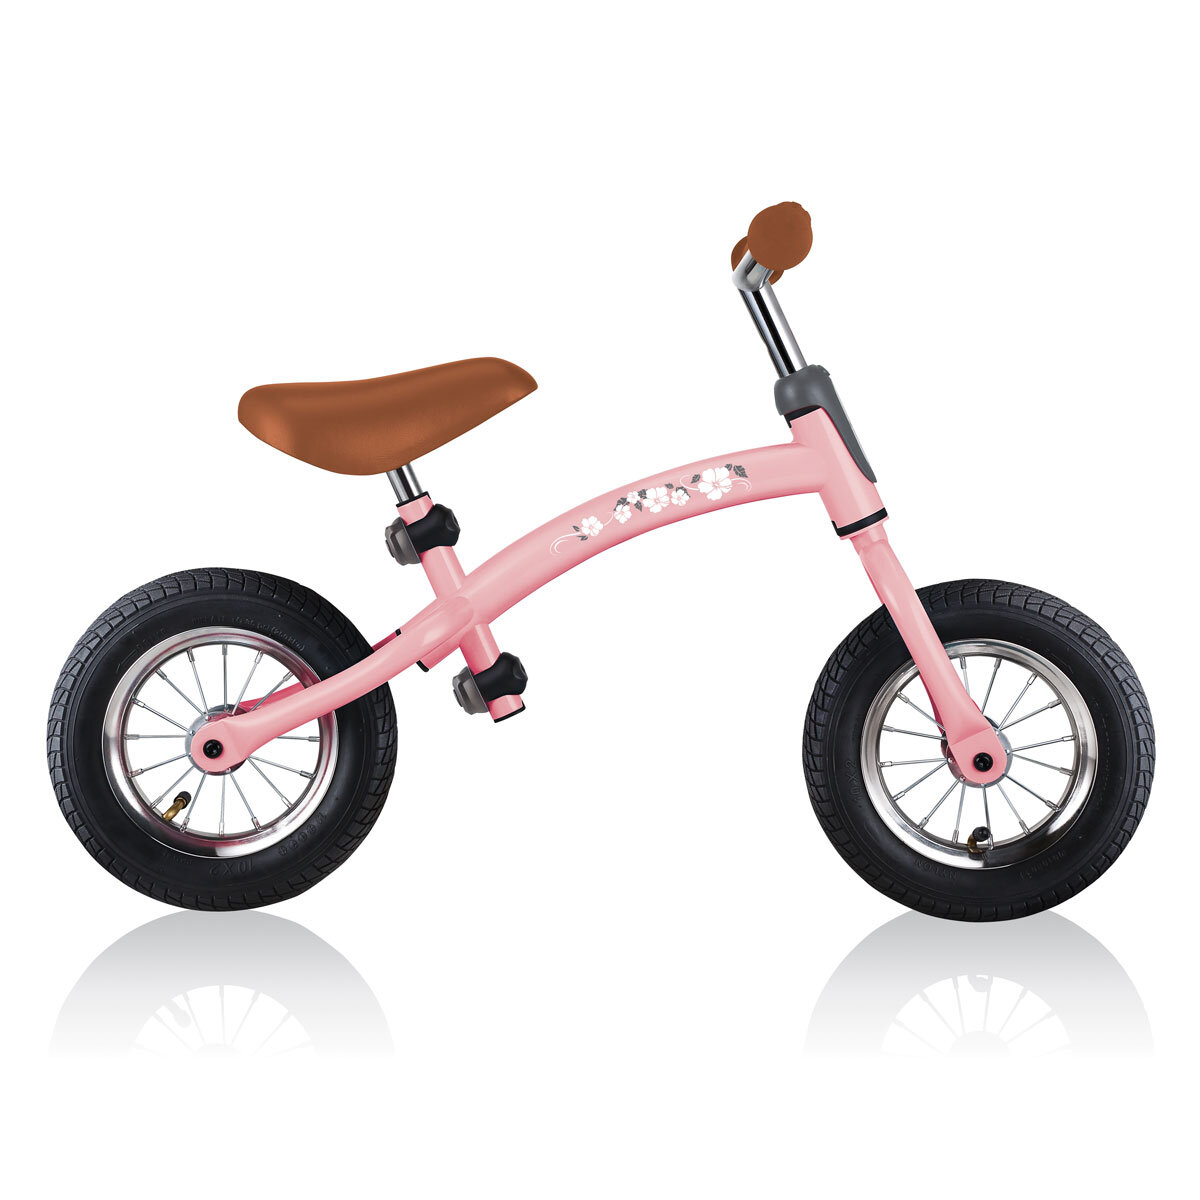 Buy Globber Go Bike Air Pastel Pink Overview3 Image at Costco.co.uk